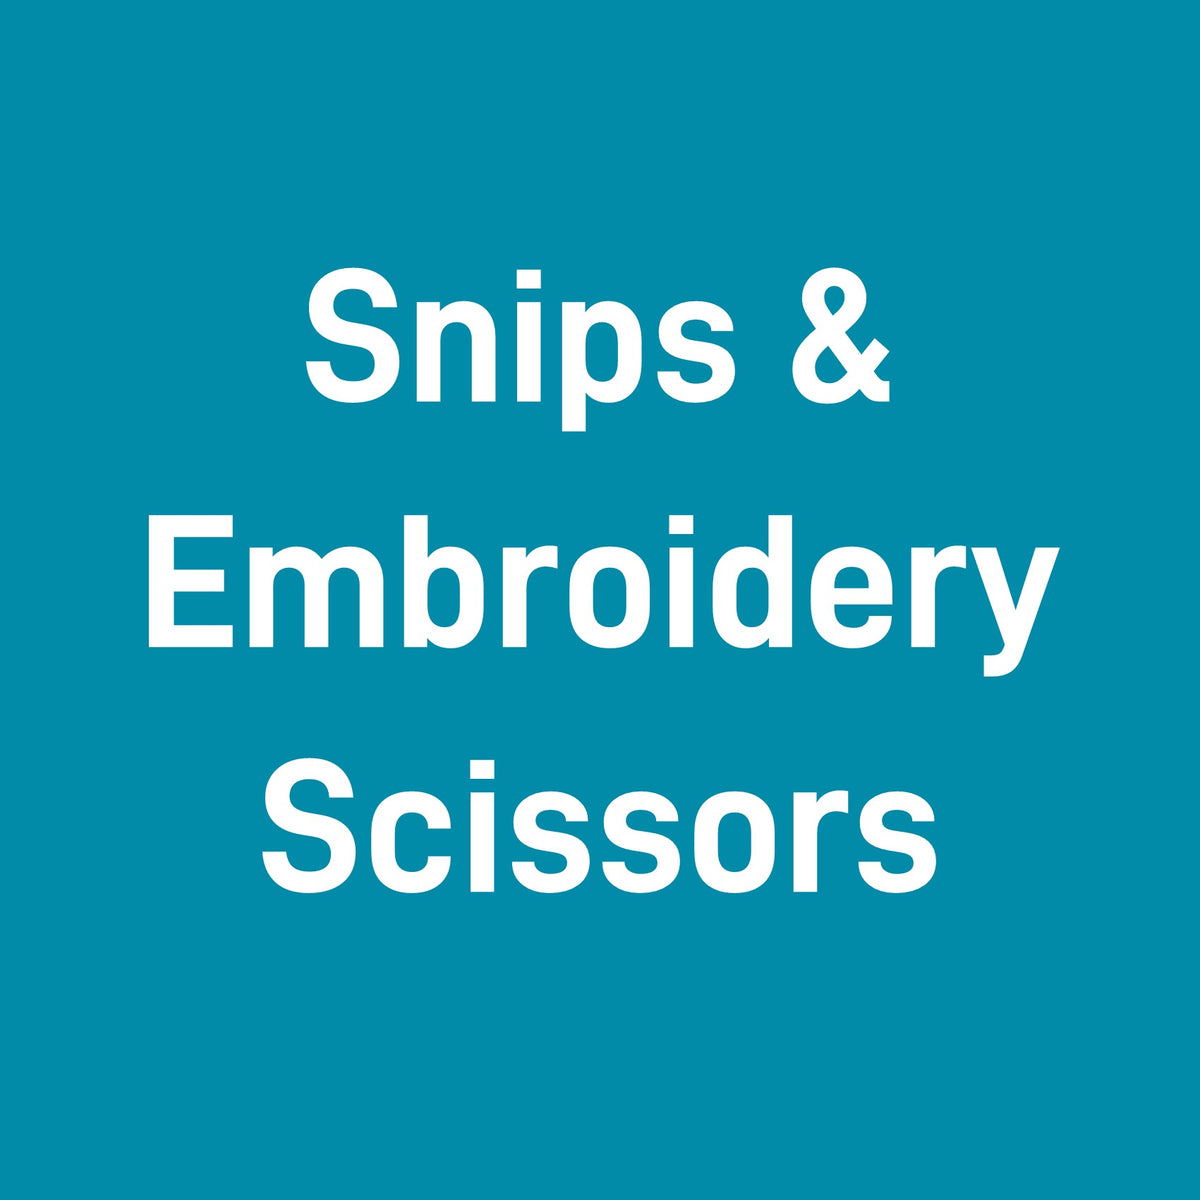 Small Scissors and Snips